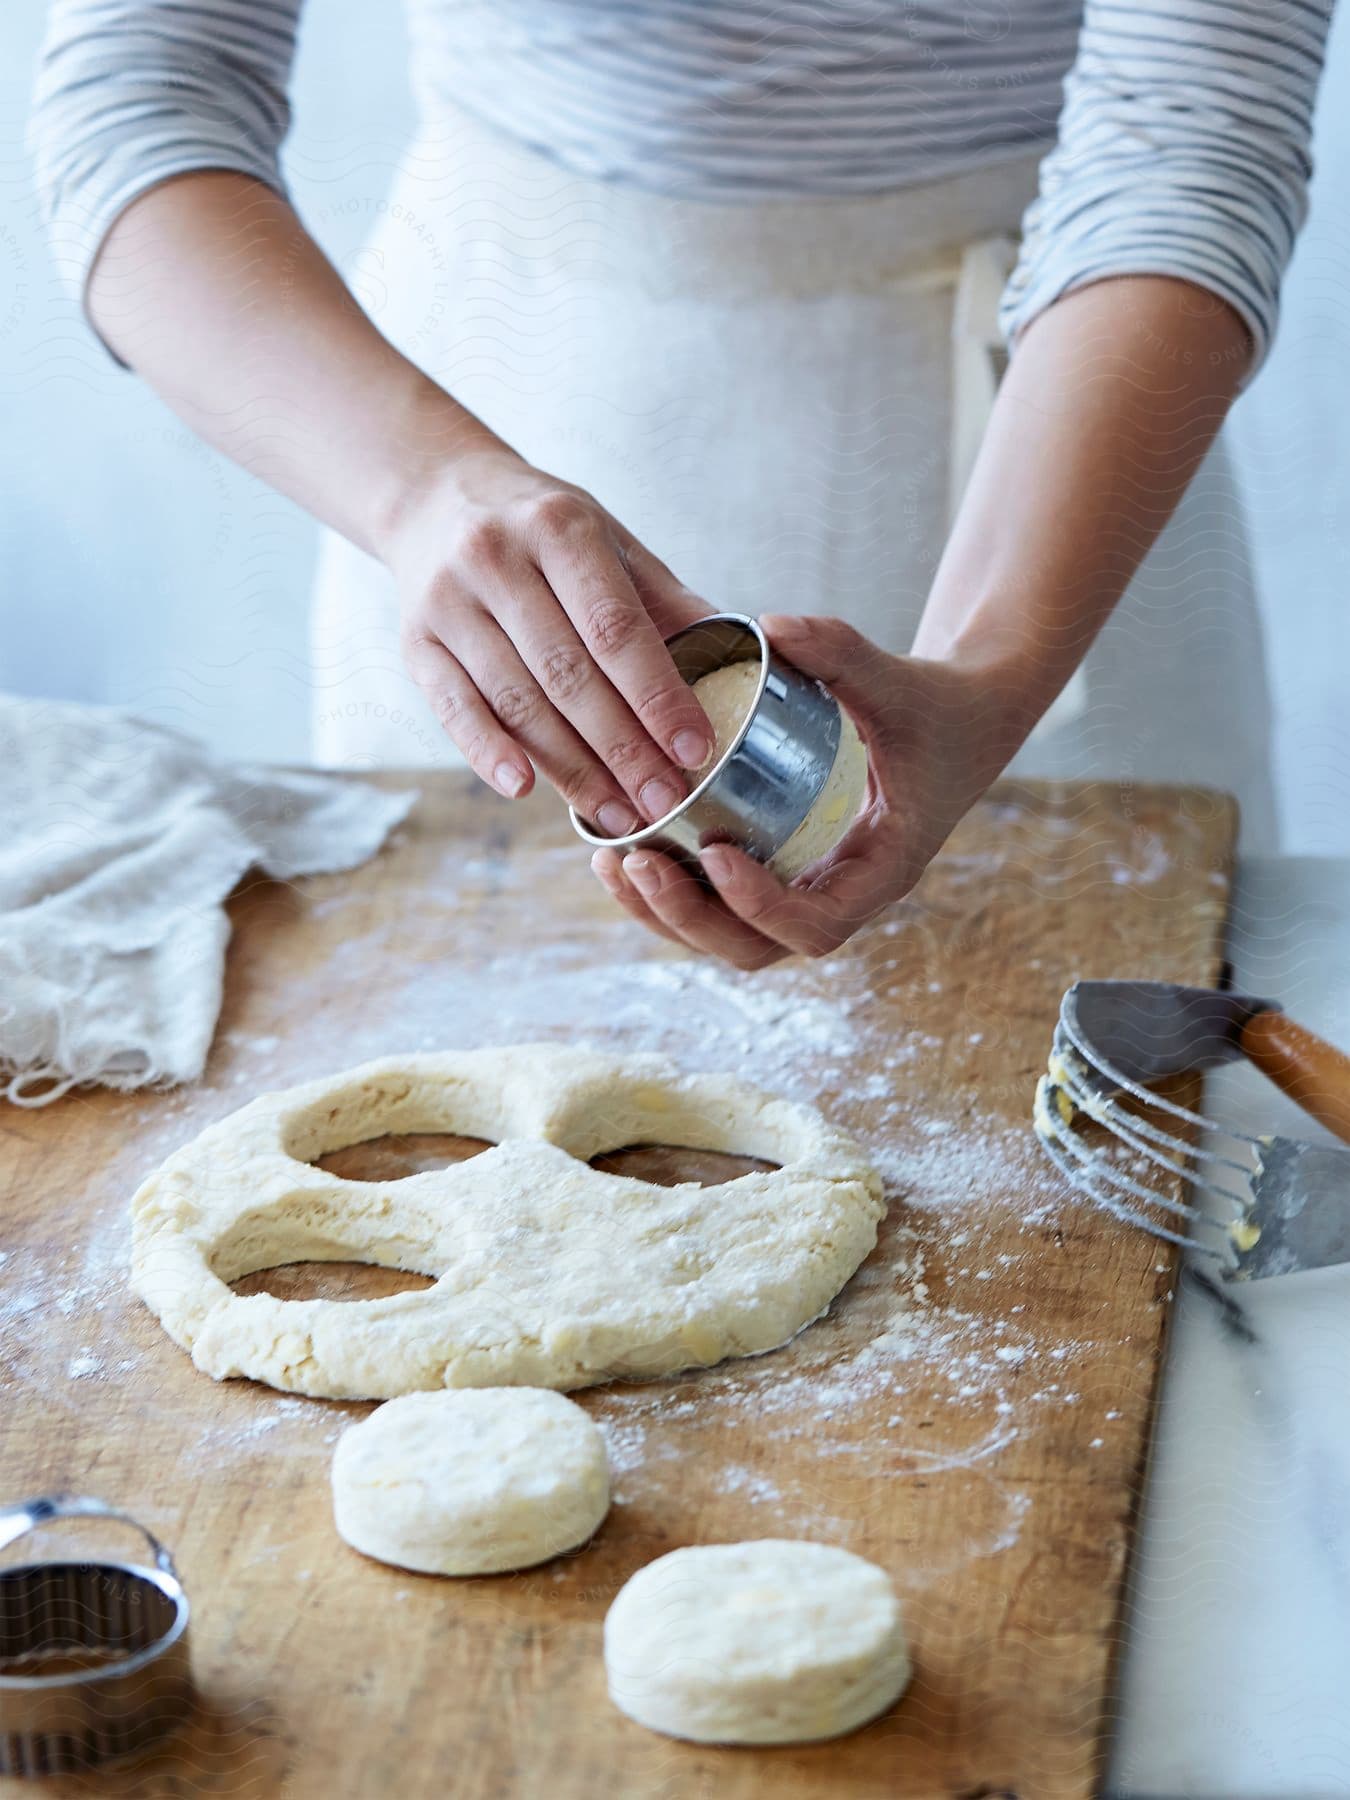 A woman uses a cookie cutter to cut round shapes out of dough on a wooden board